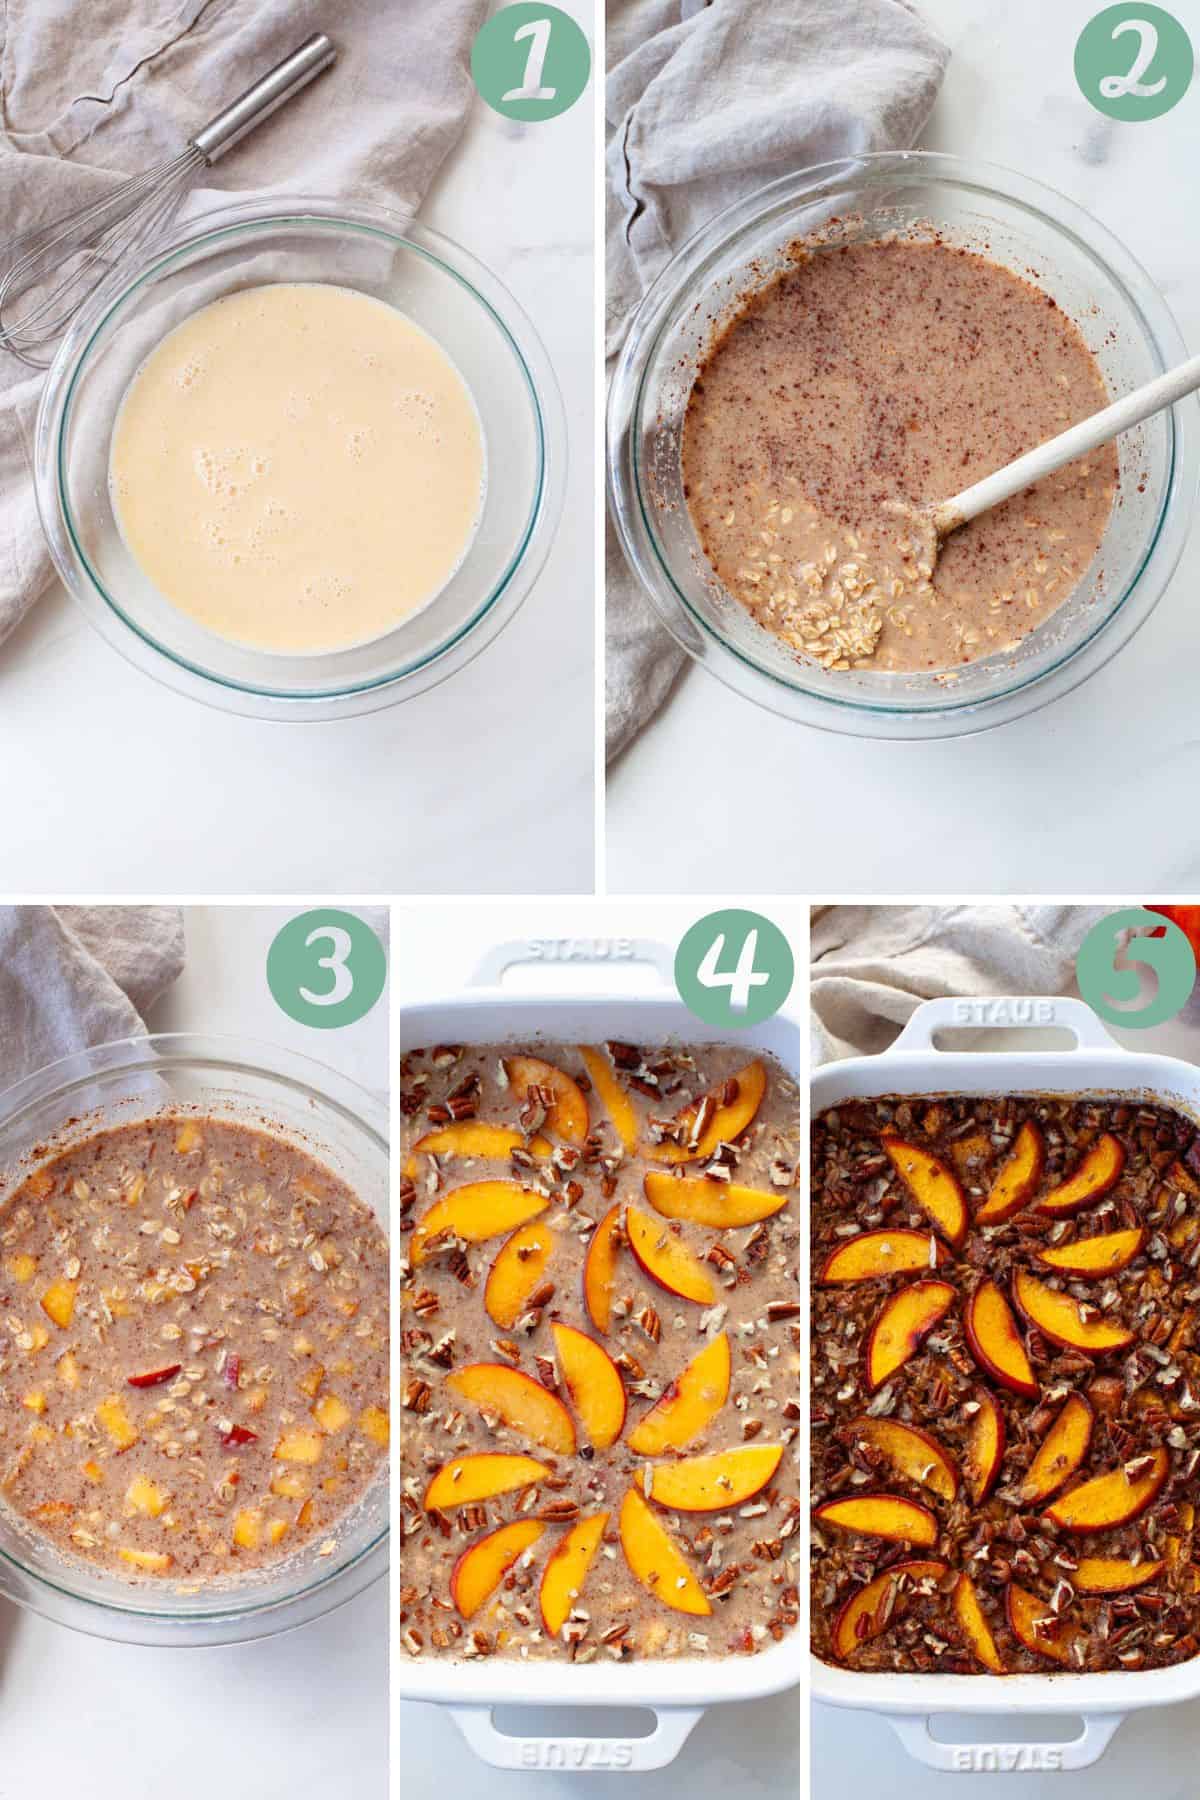 Step by step chart of how to make peach baked oatmeal.